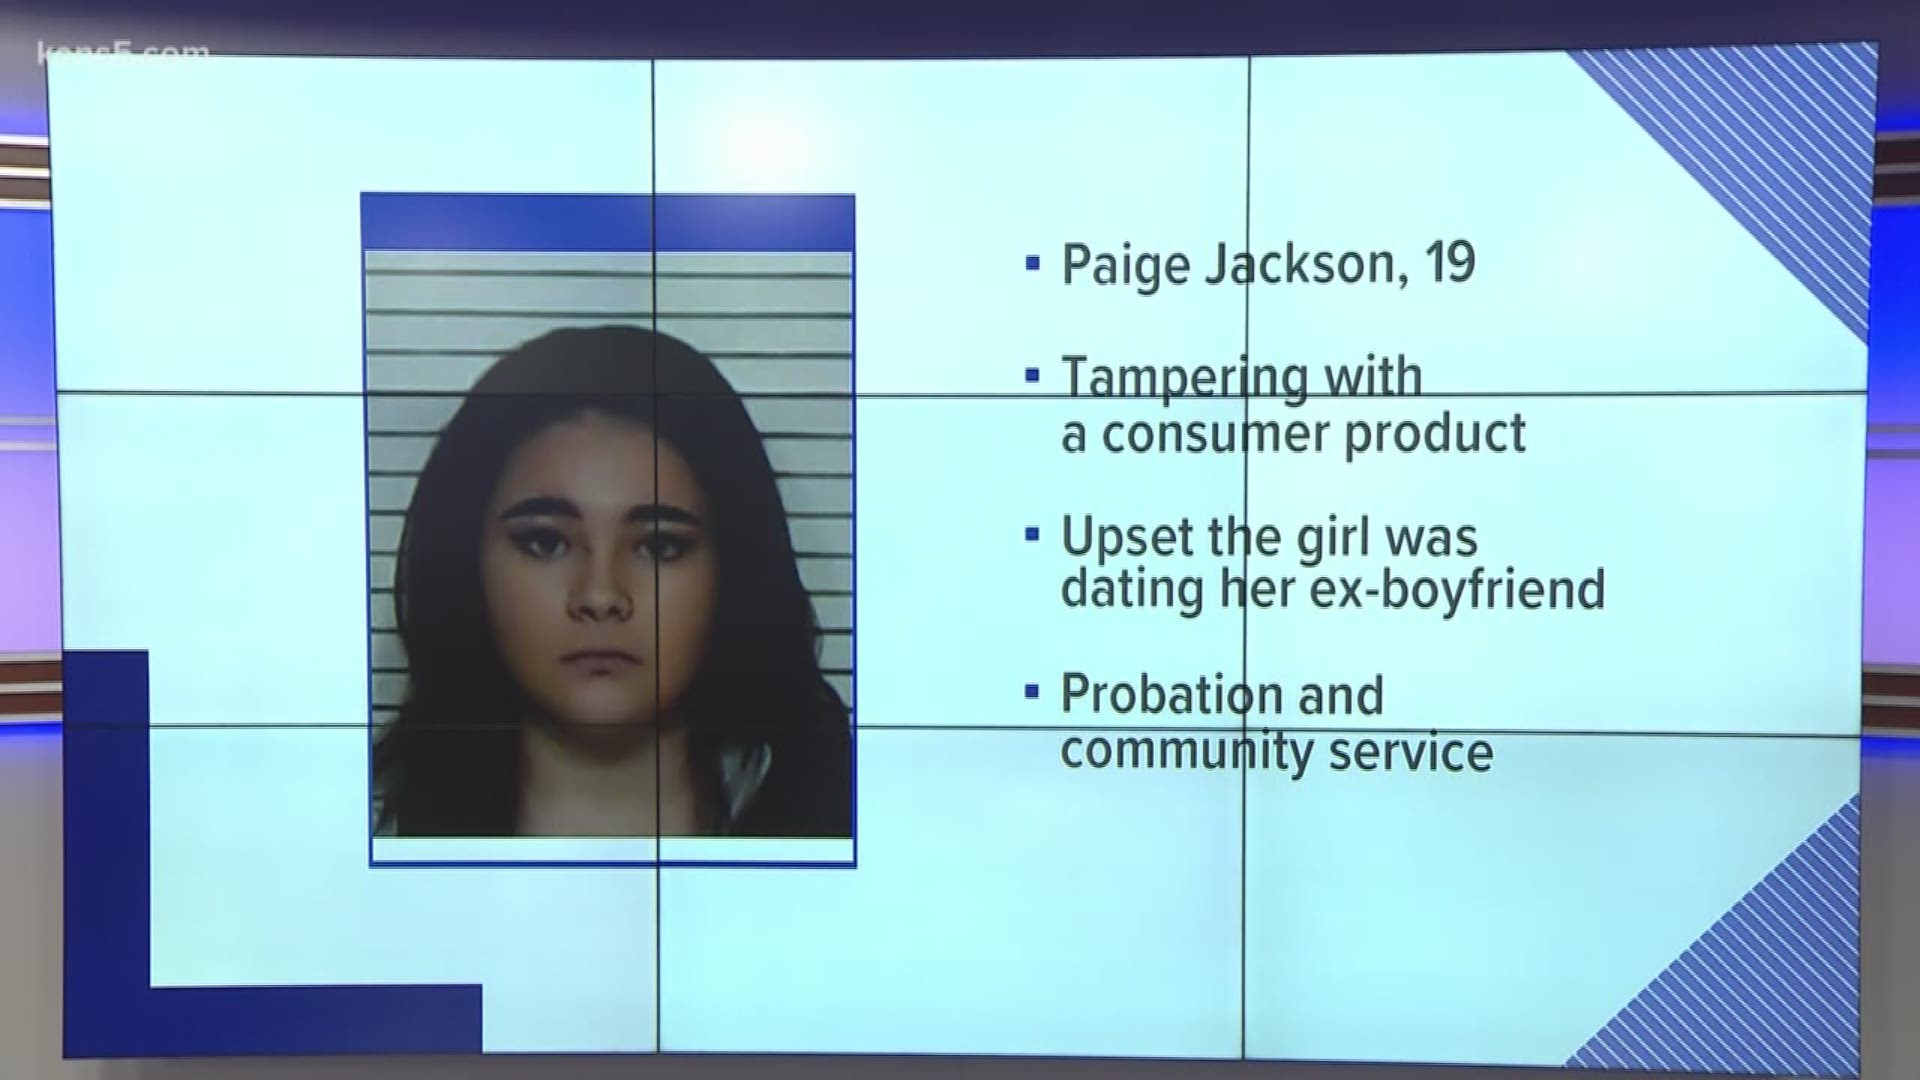 Paige Jackson was accused of spiking the victim's drink because she was reportedly upset the girl was dating her ex-boyfriend.